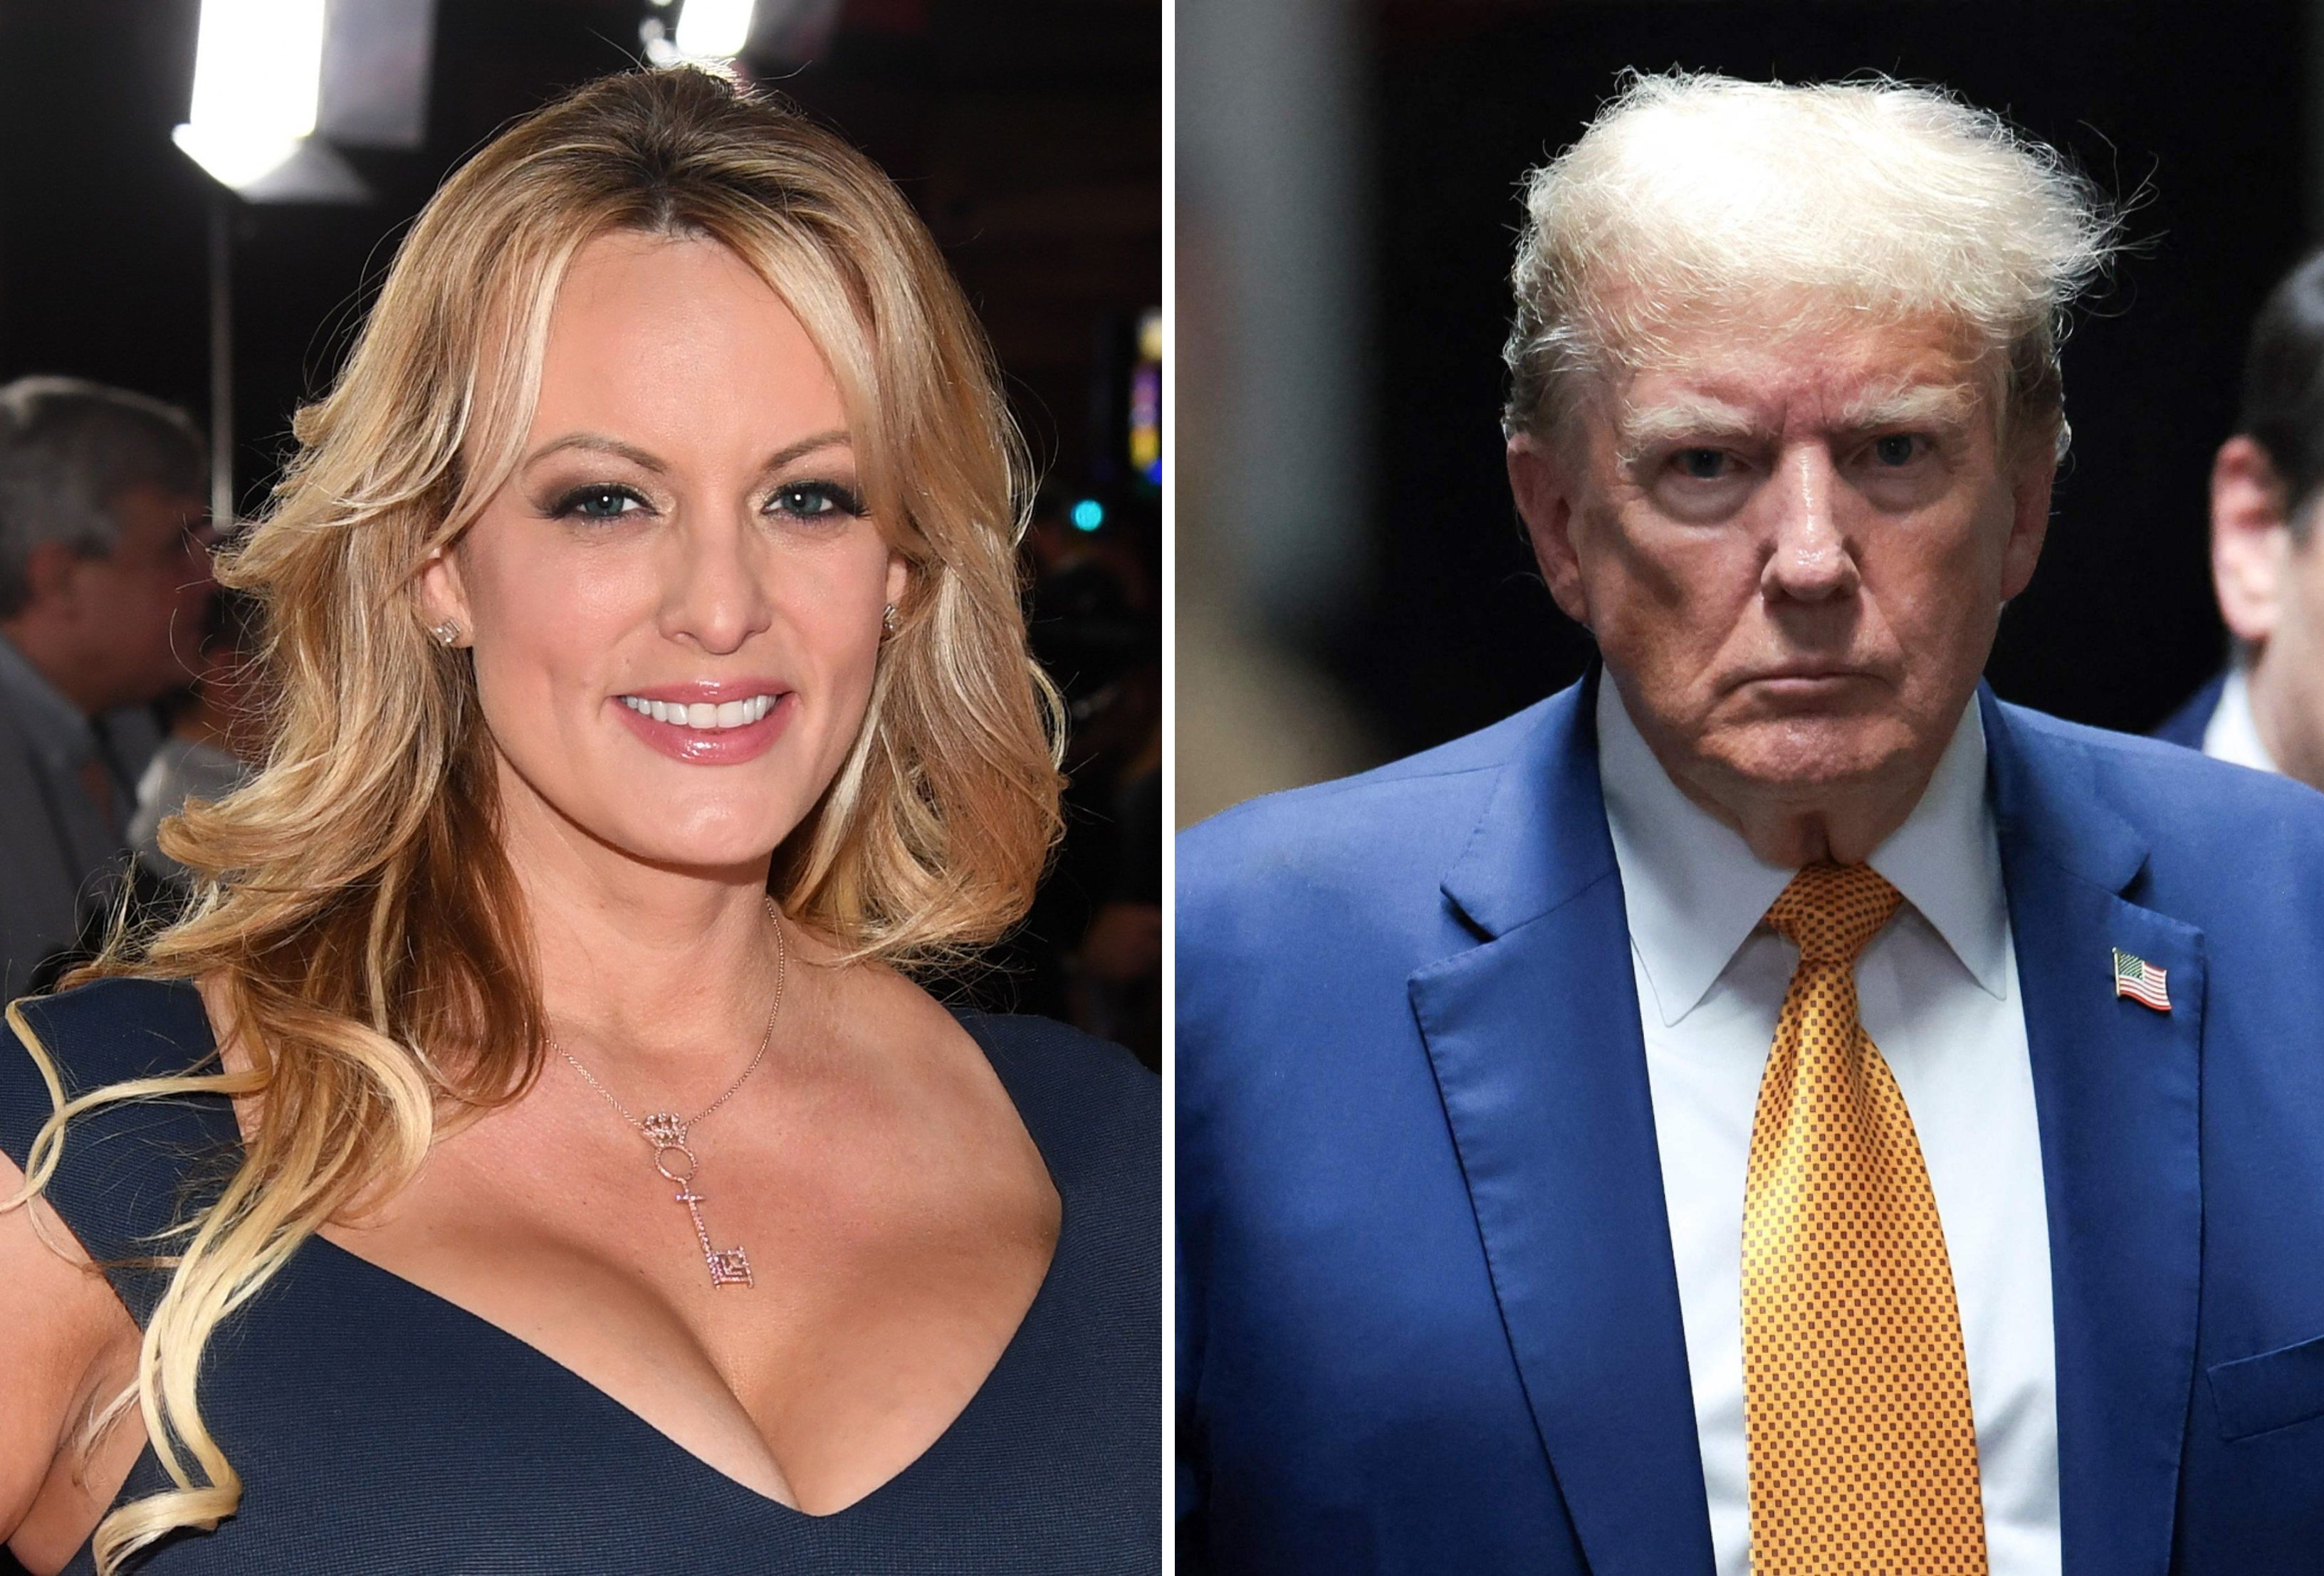 Stormy Daniels at an event; ex US president Donald Trump makes a court appearance. Photos: AFP